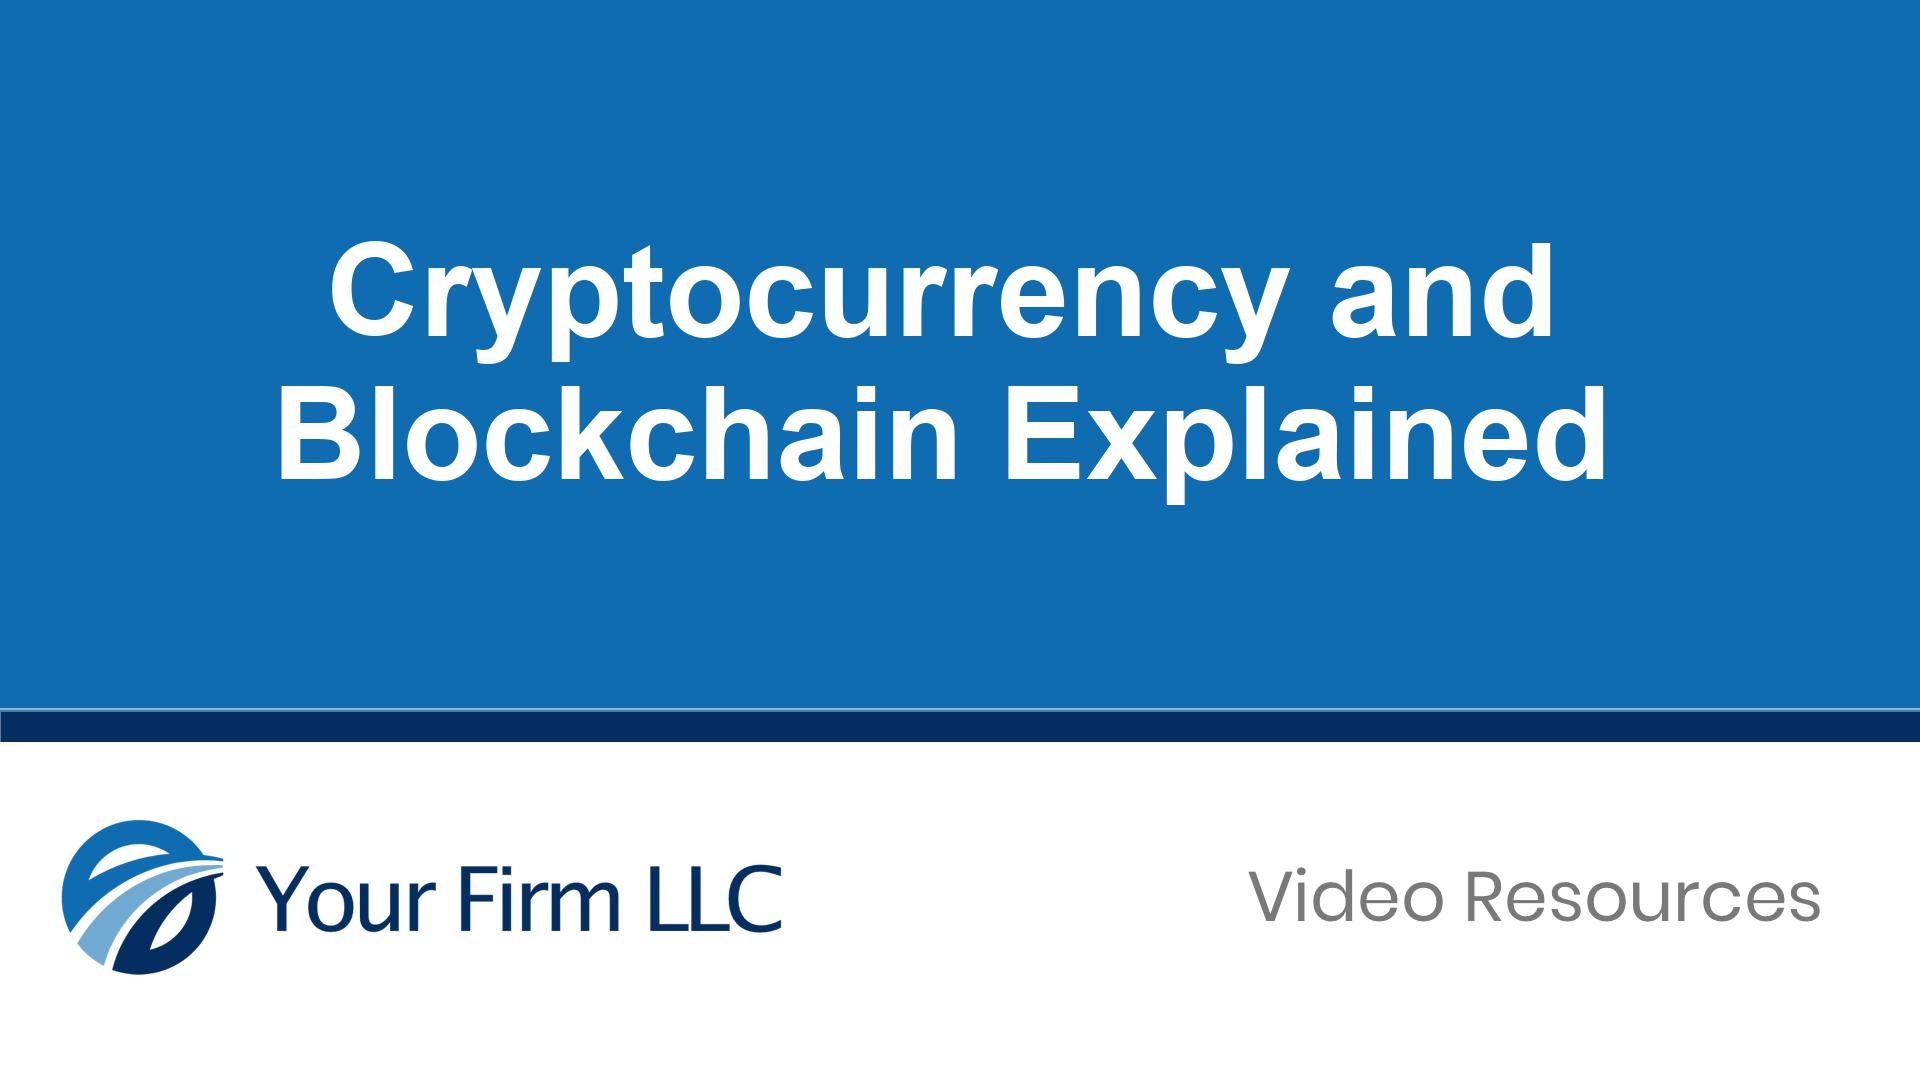 Cryptocurrency and Blockchain Explained